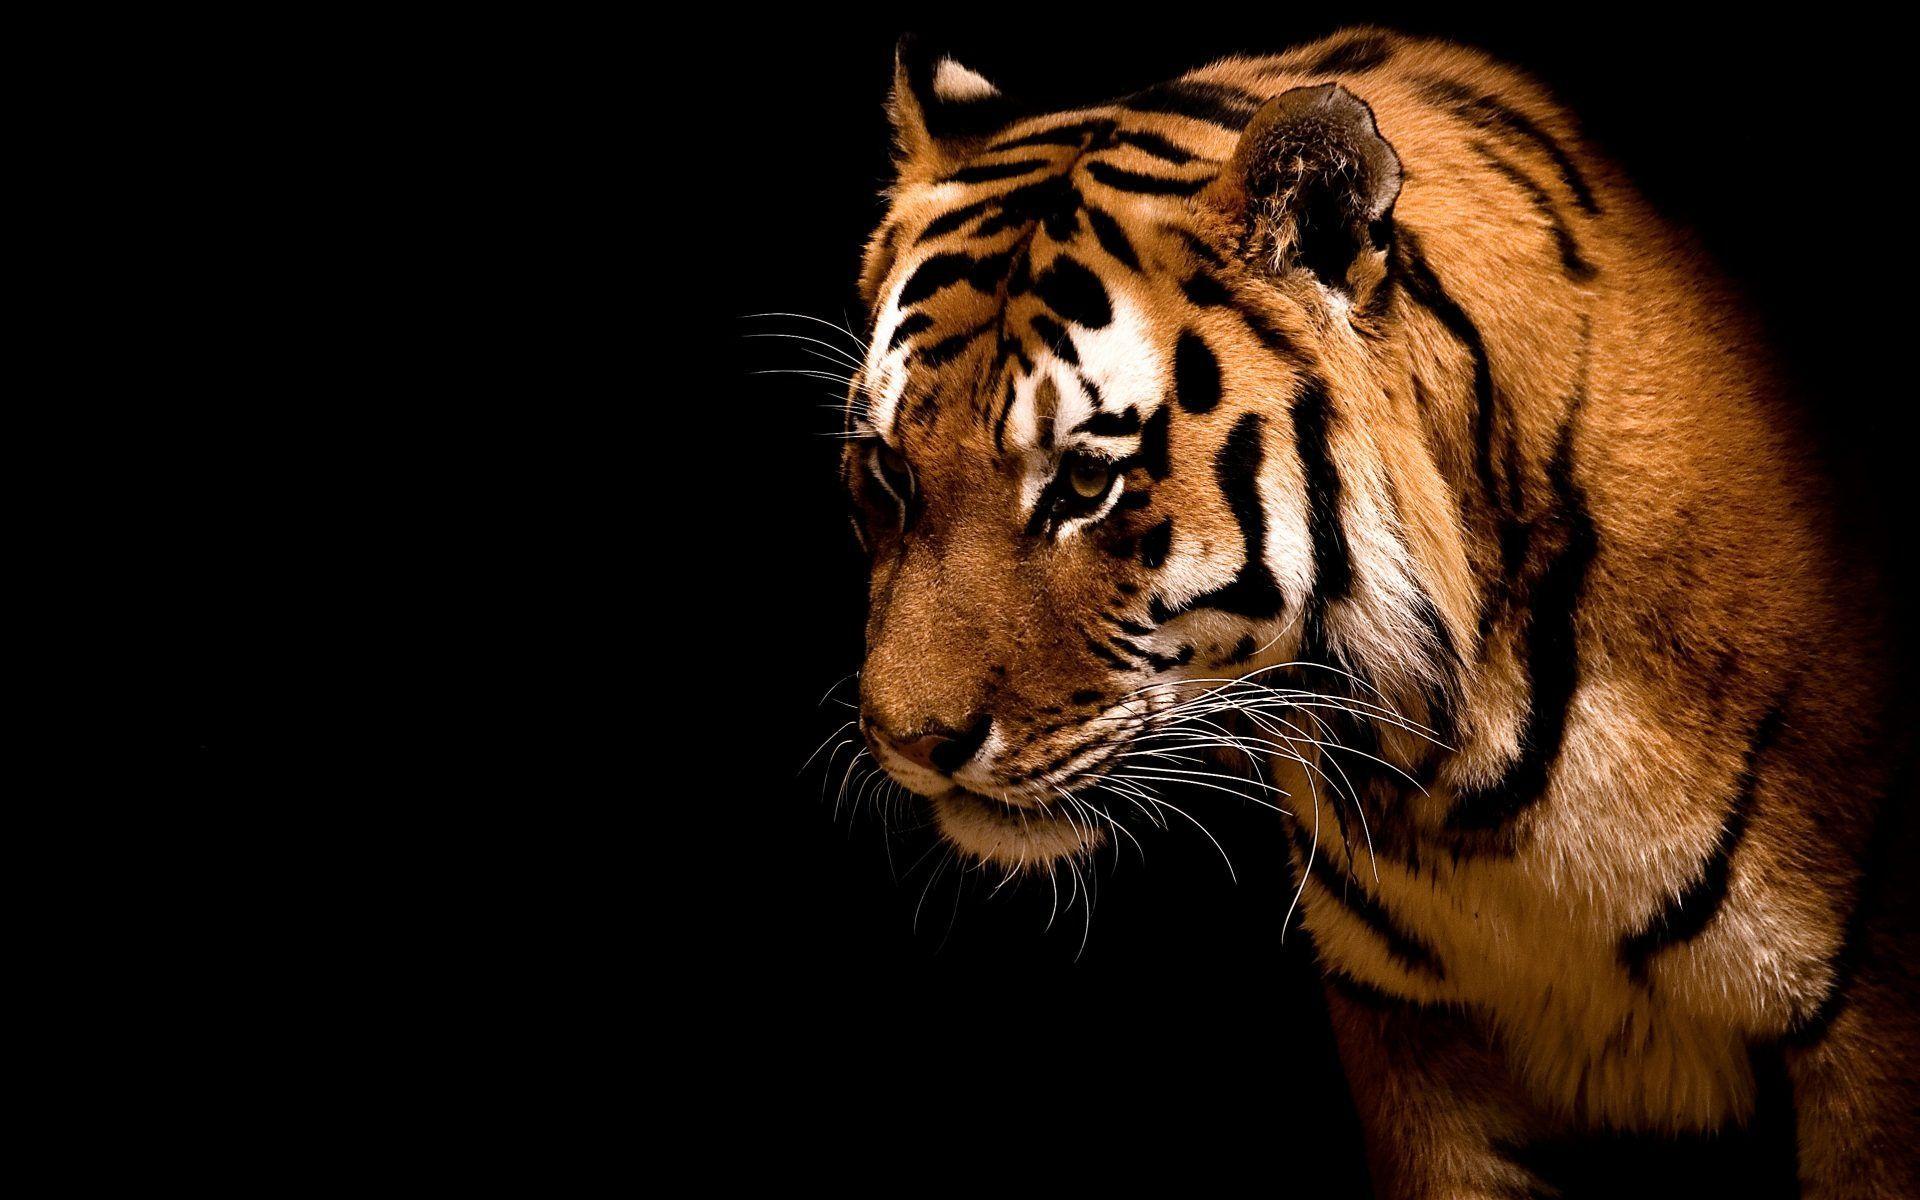 Tiger on a black background wallpaper and image